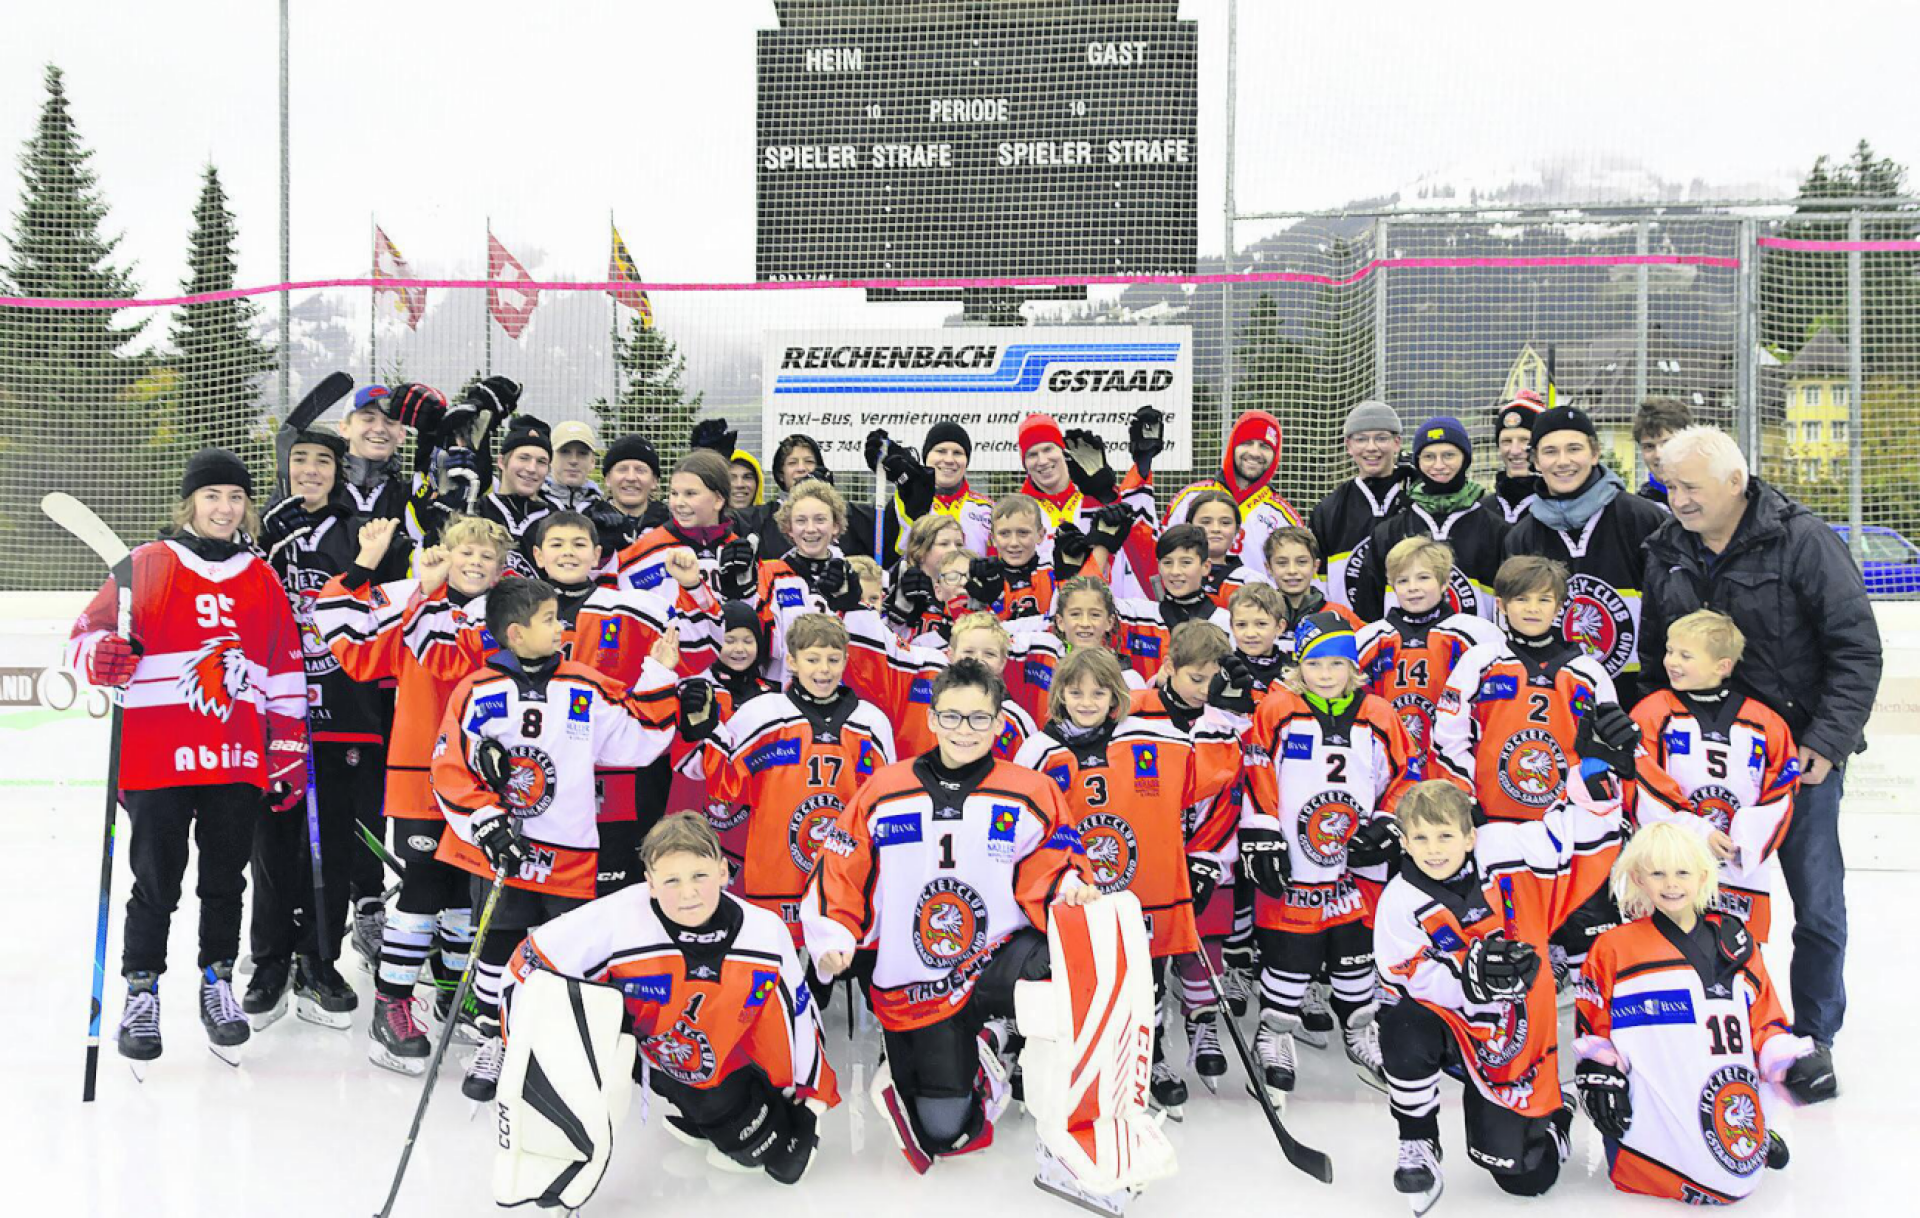 The Swiss Ice Hockey Day in Gstaad attracted many ice hockey fans. PHOTOS: ERICH KÄSER